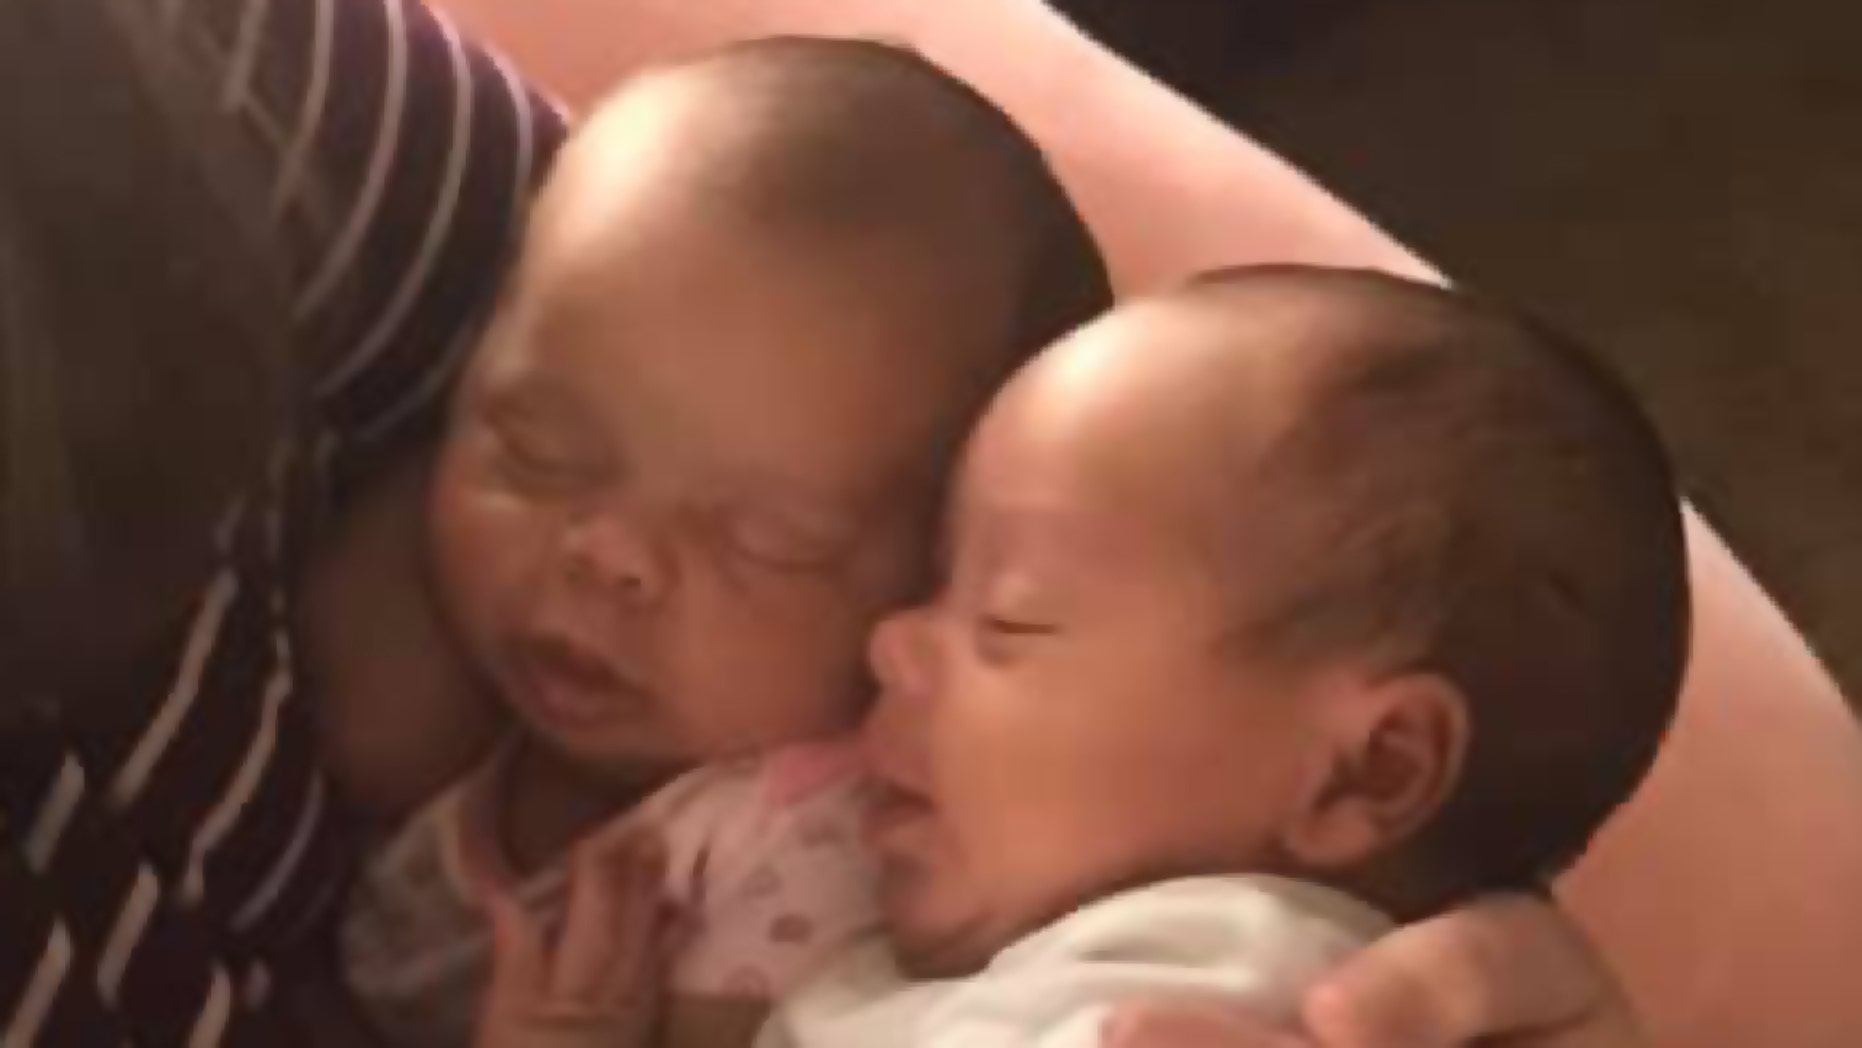 A set of twins in North Carolina was saved after their mother, upon hearing she was having twins, decide to reverse the chemical abortion.